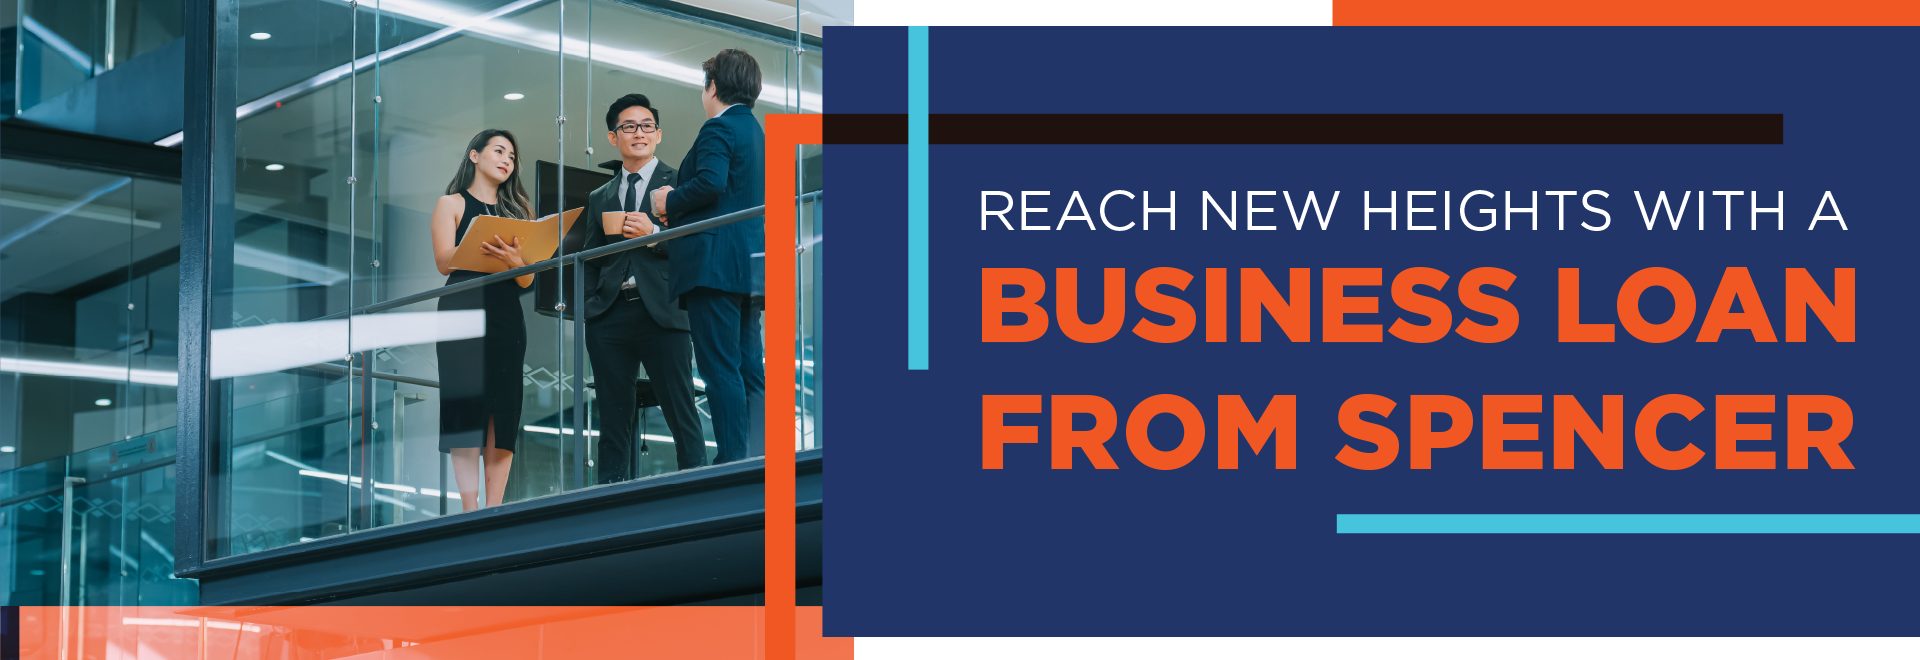 Reach New Heights with a Business Loan from Spencer